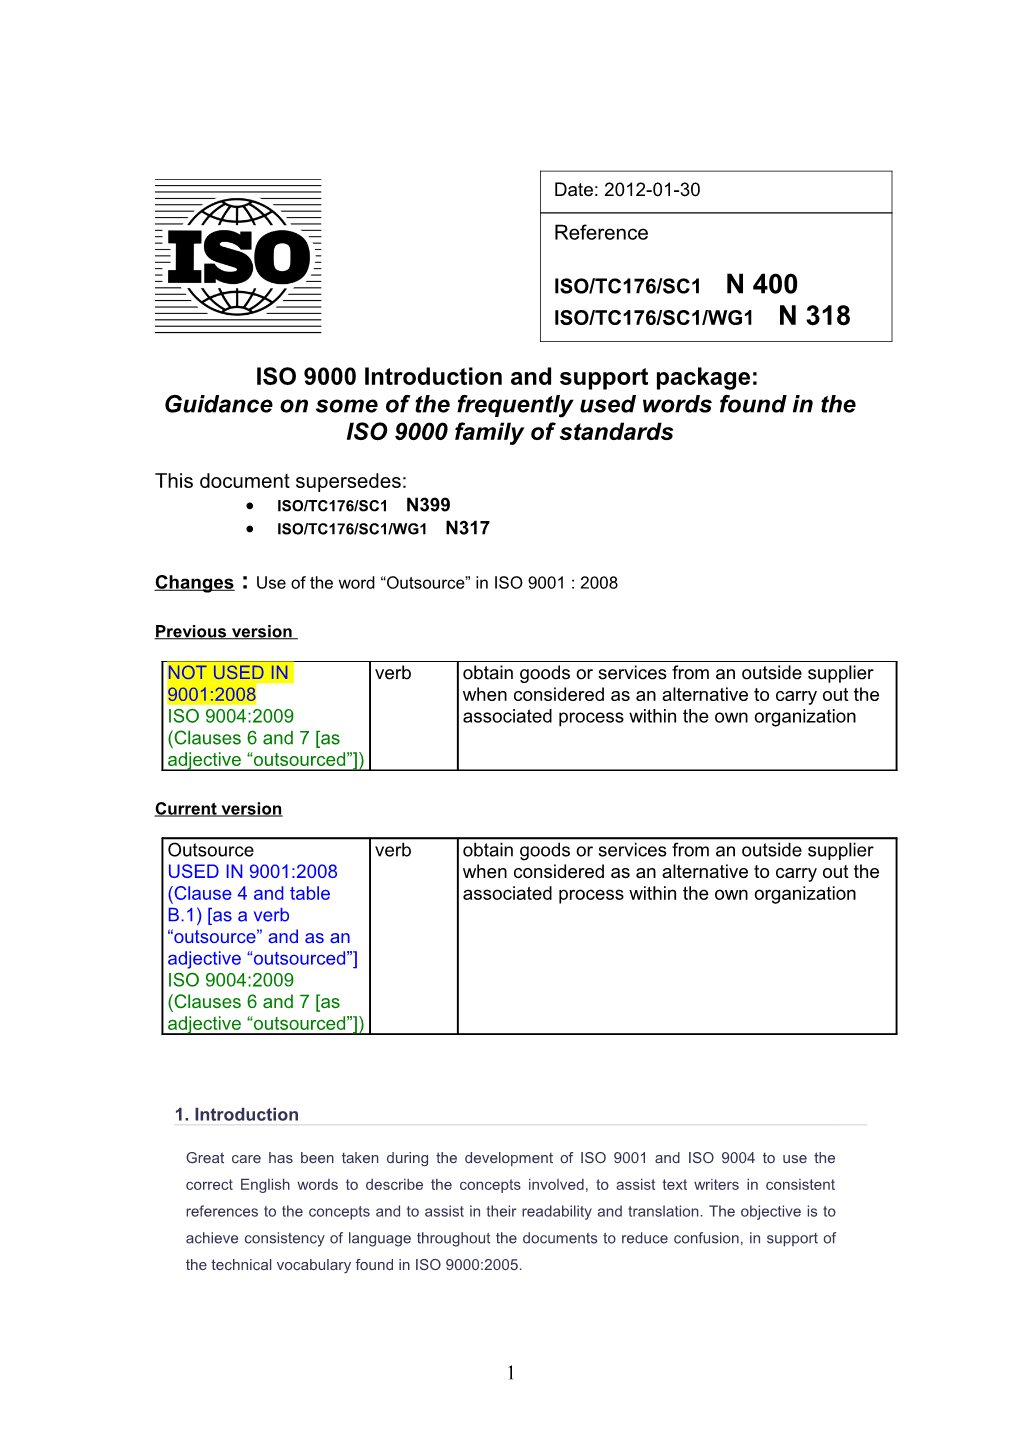 ISO 9000 Introduction and Support Package: Guidance on Some of the Frequently Used Words